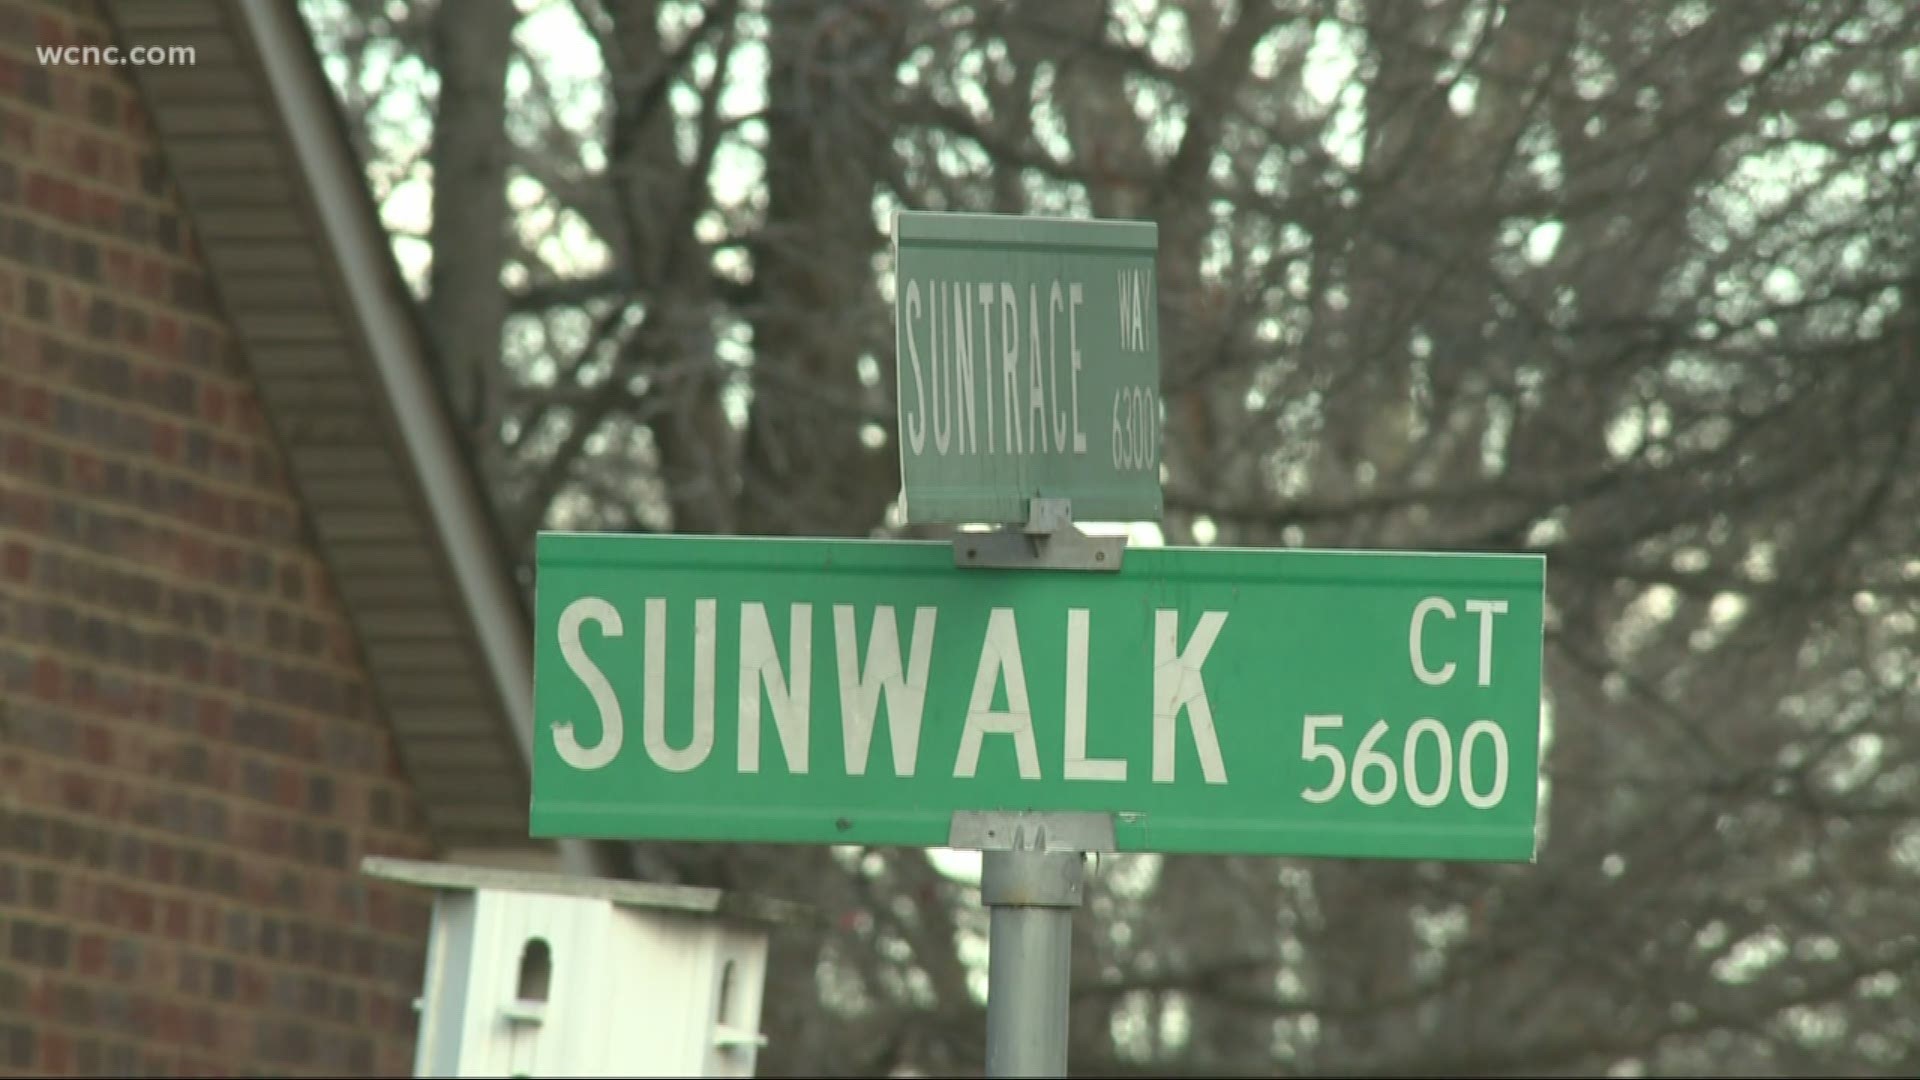 On Tuesday afternoon, police said an 11-year-old girl was walking home from the school bus near the intersection of Suntrace Way and Sunwalk Court.